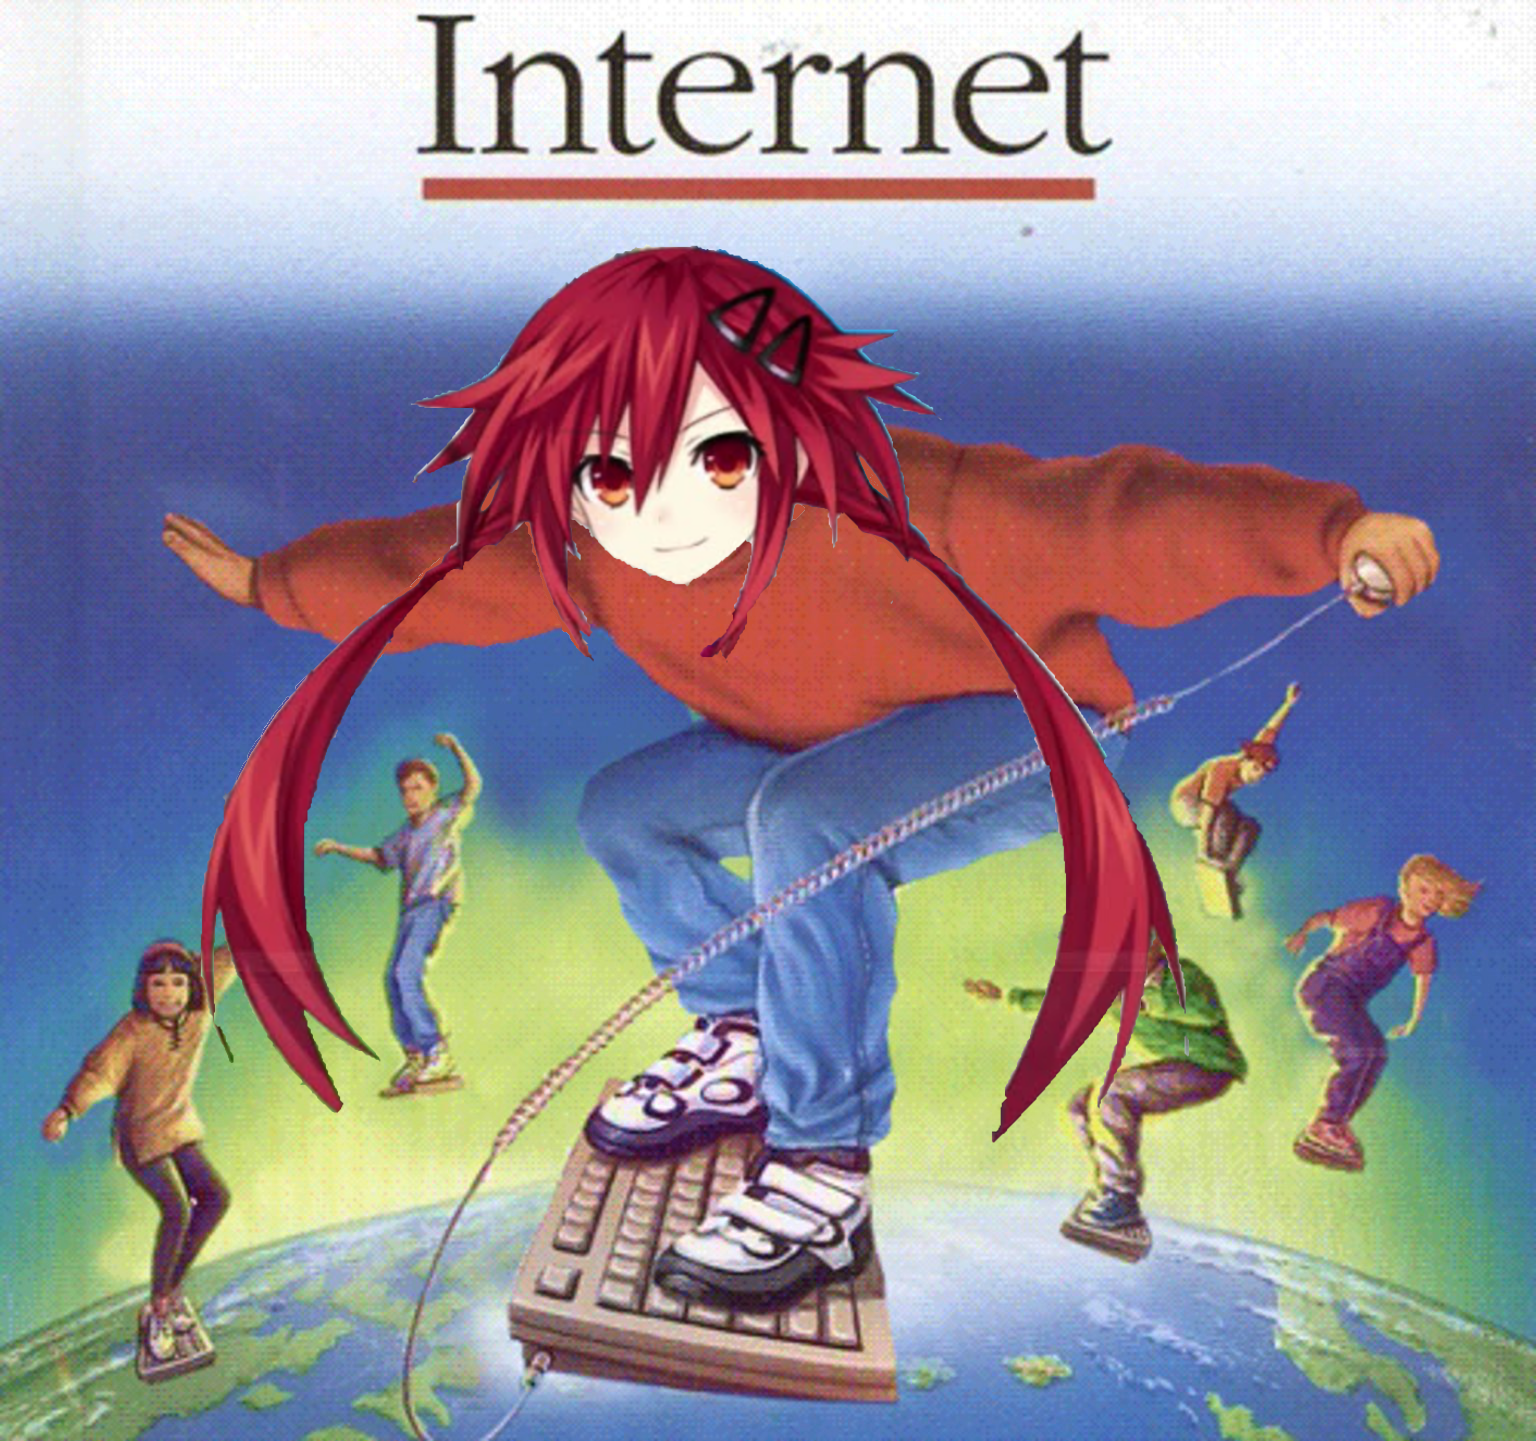 Surfin' the web!